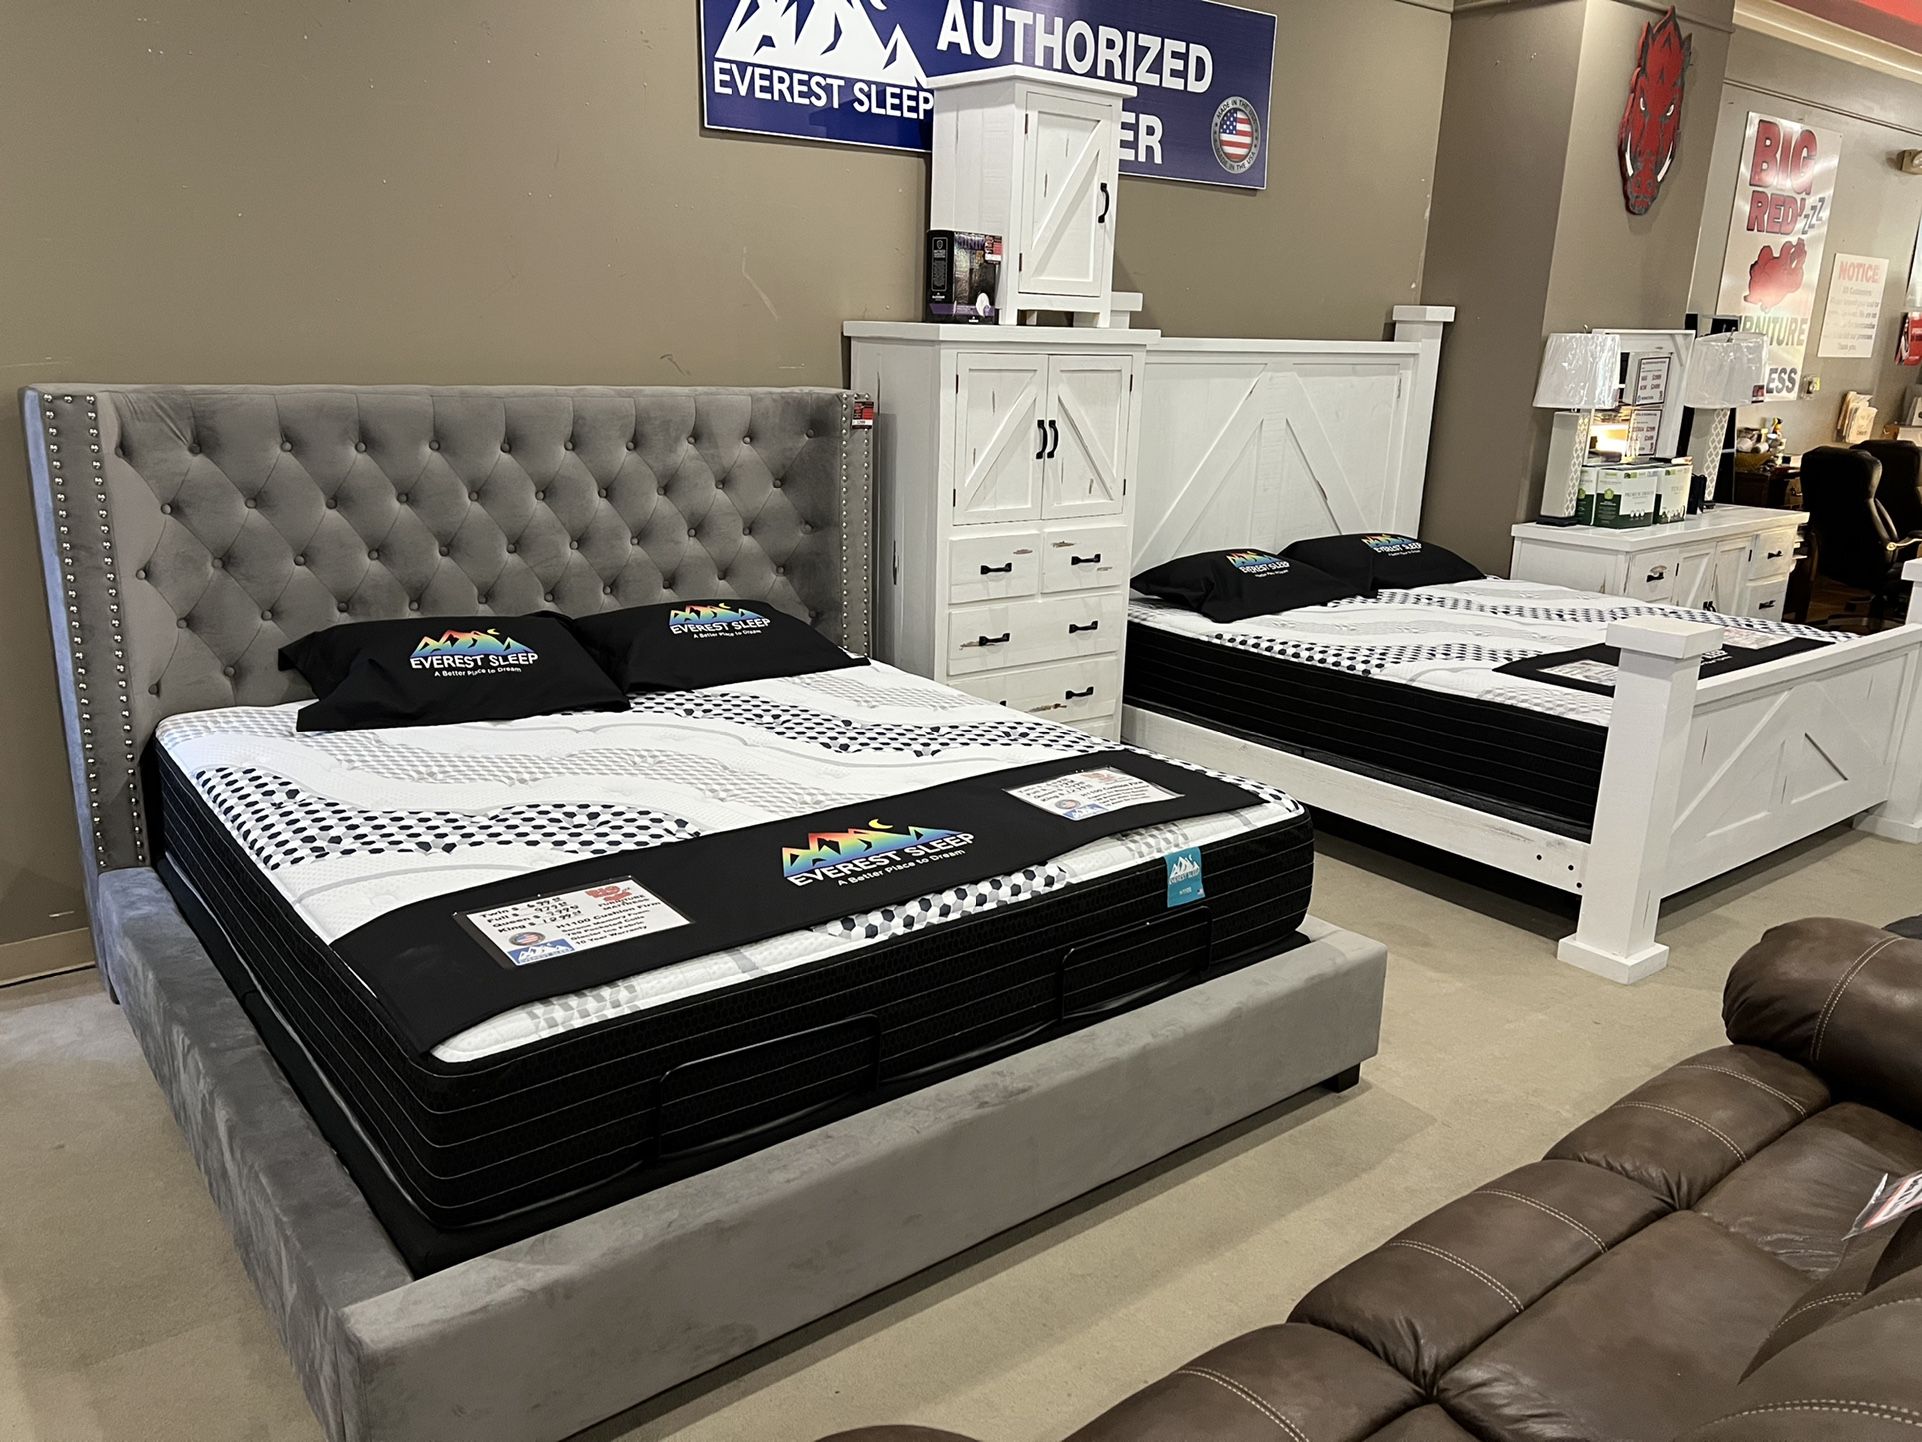 Brand New King Mattresses Starting As Low As $279.00!!